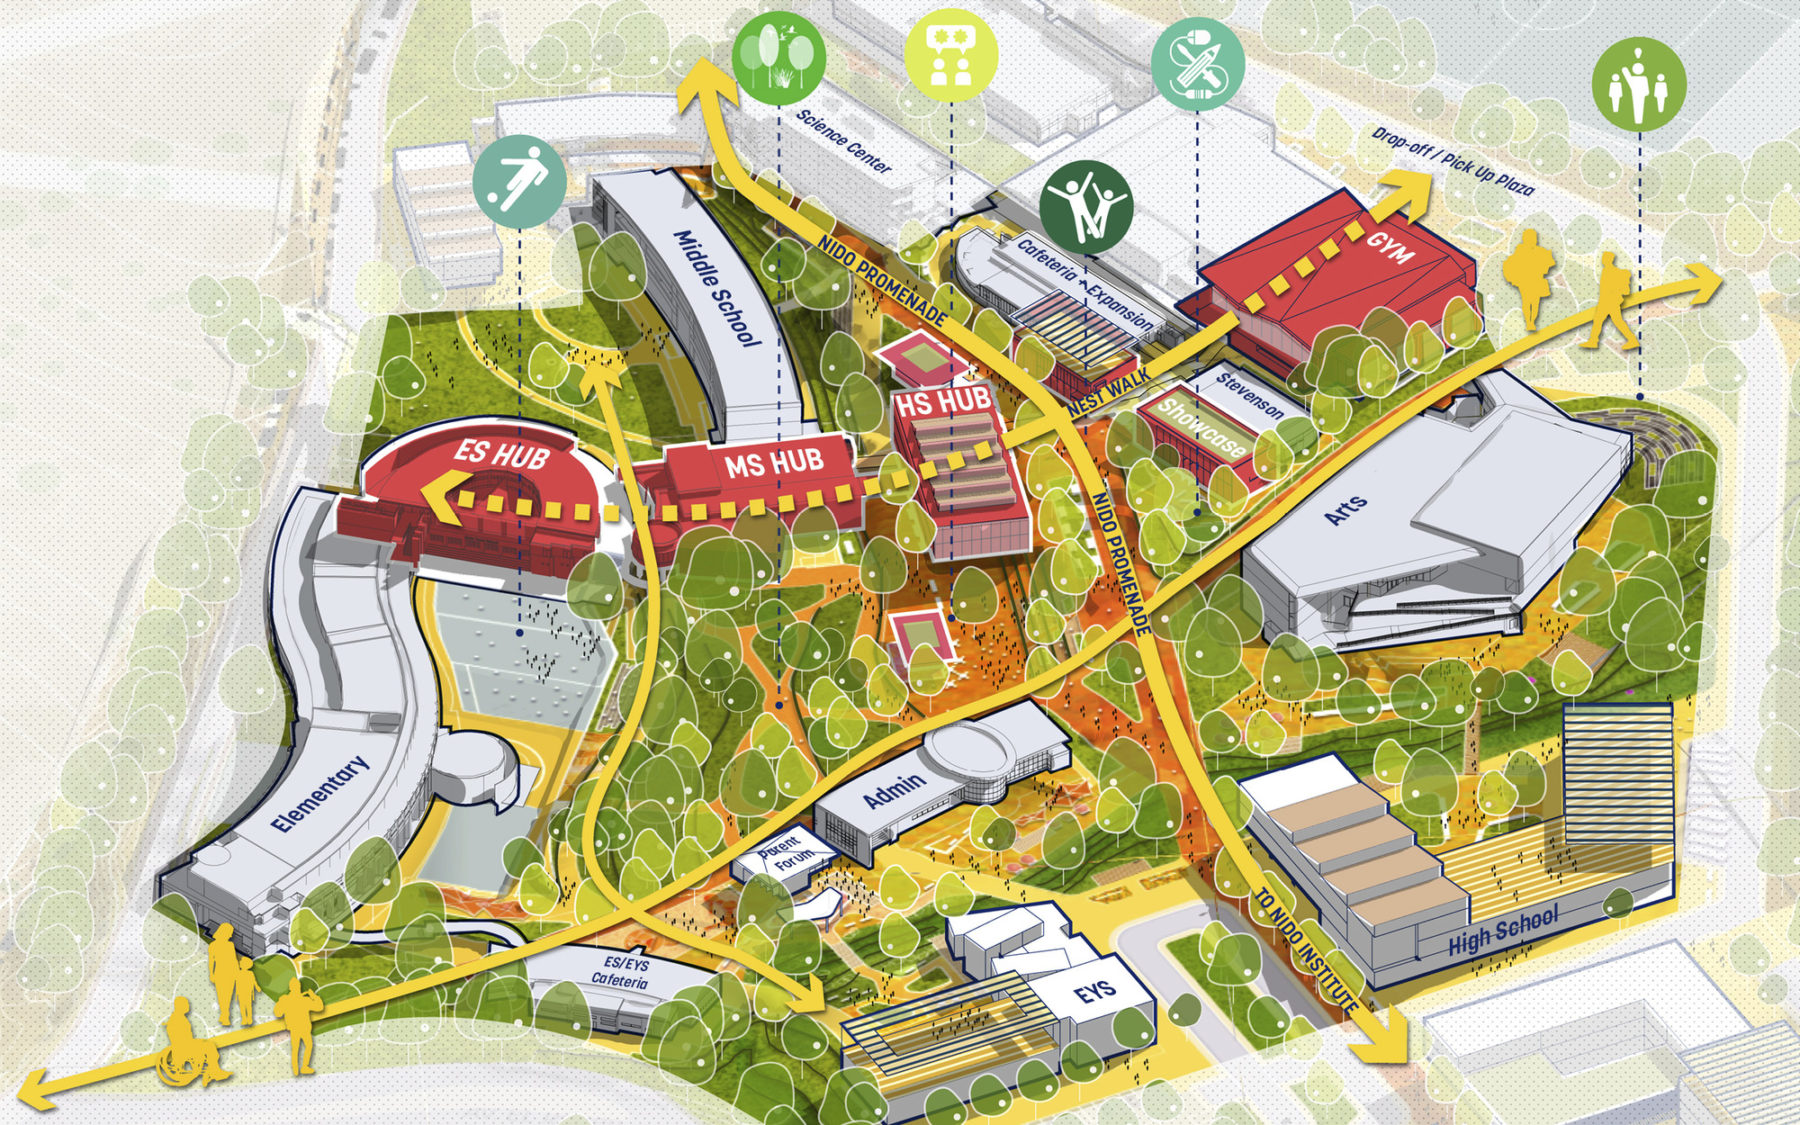 aerial axon diagram of portion of campus. Yellow arrows note major pedestrian throughways and icons show program distribution across the district.